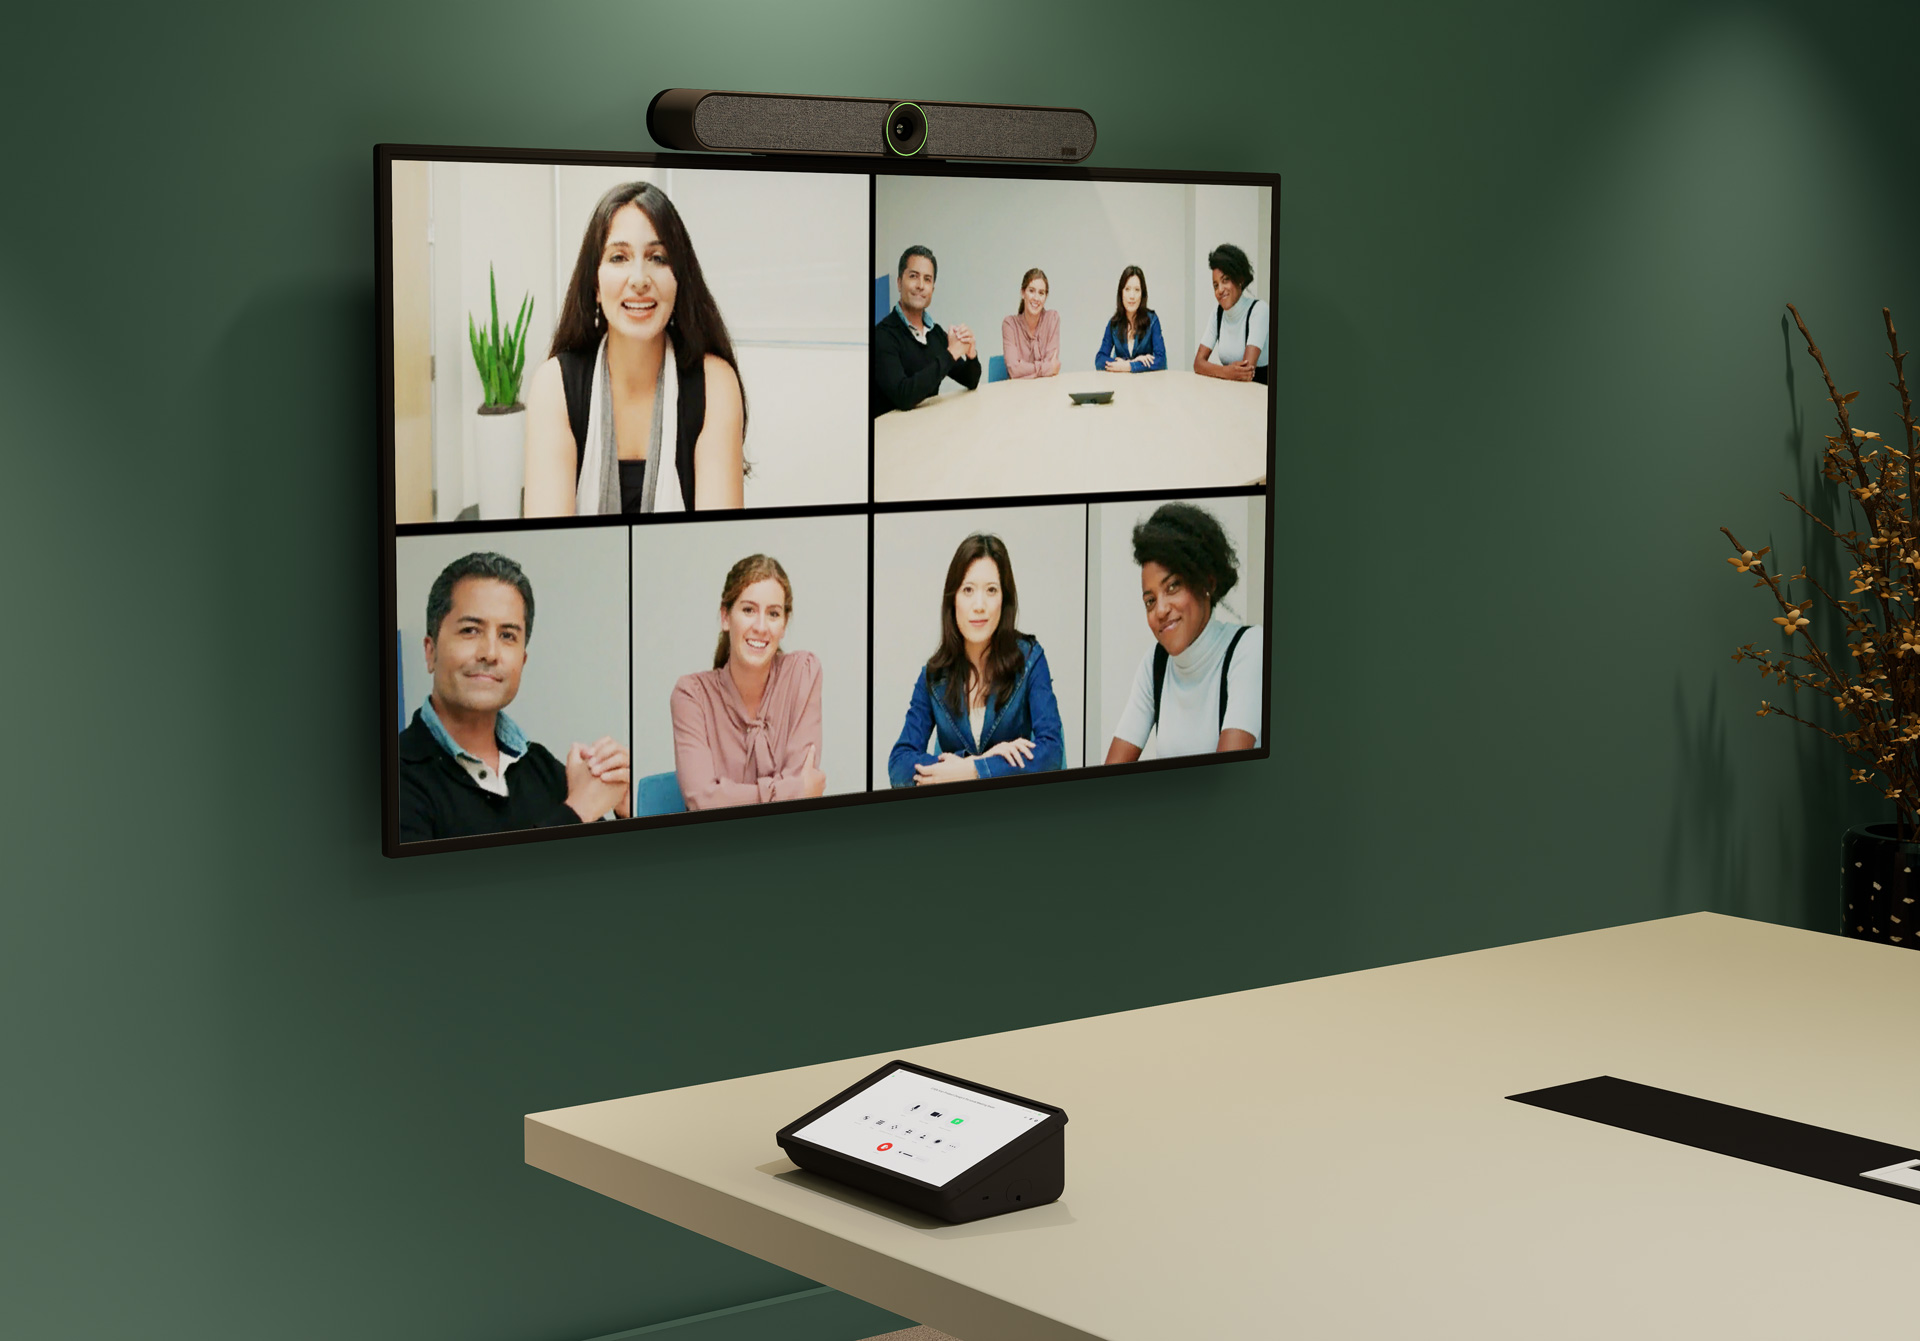 DTEN Expands Video Conferencing Portfolio with Innovative Small Room Solution: Introducing DTEN Bar with DTEN Mate 